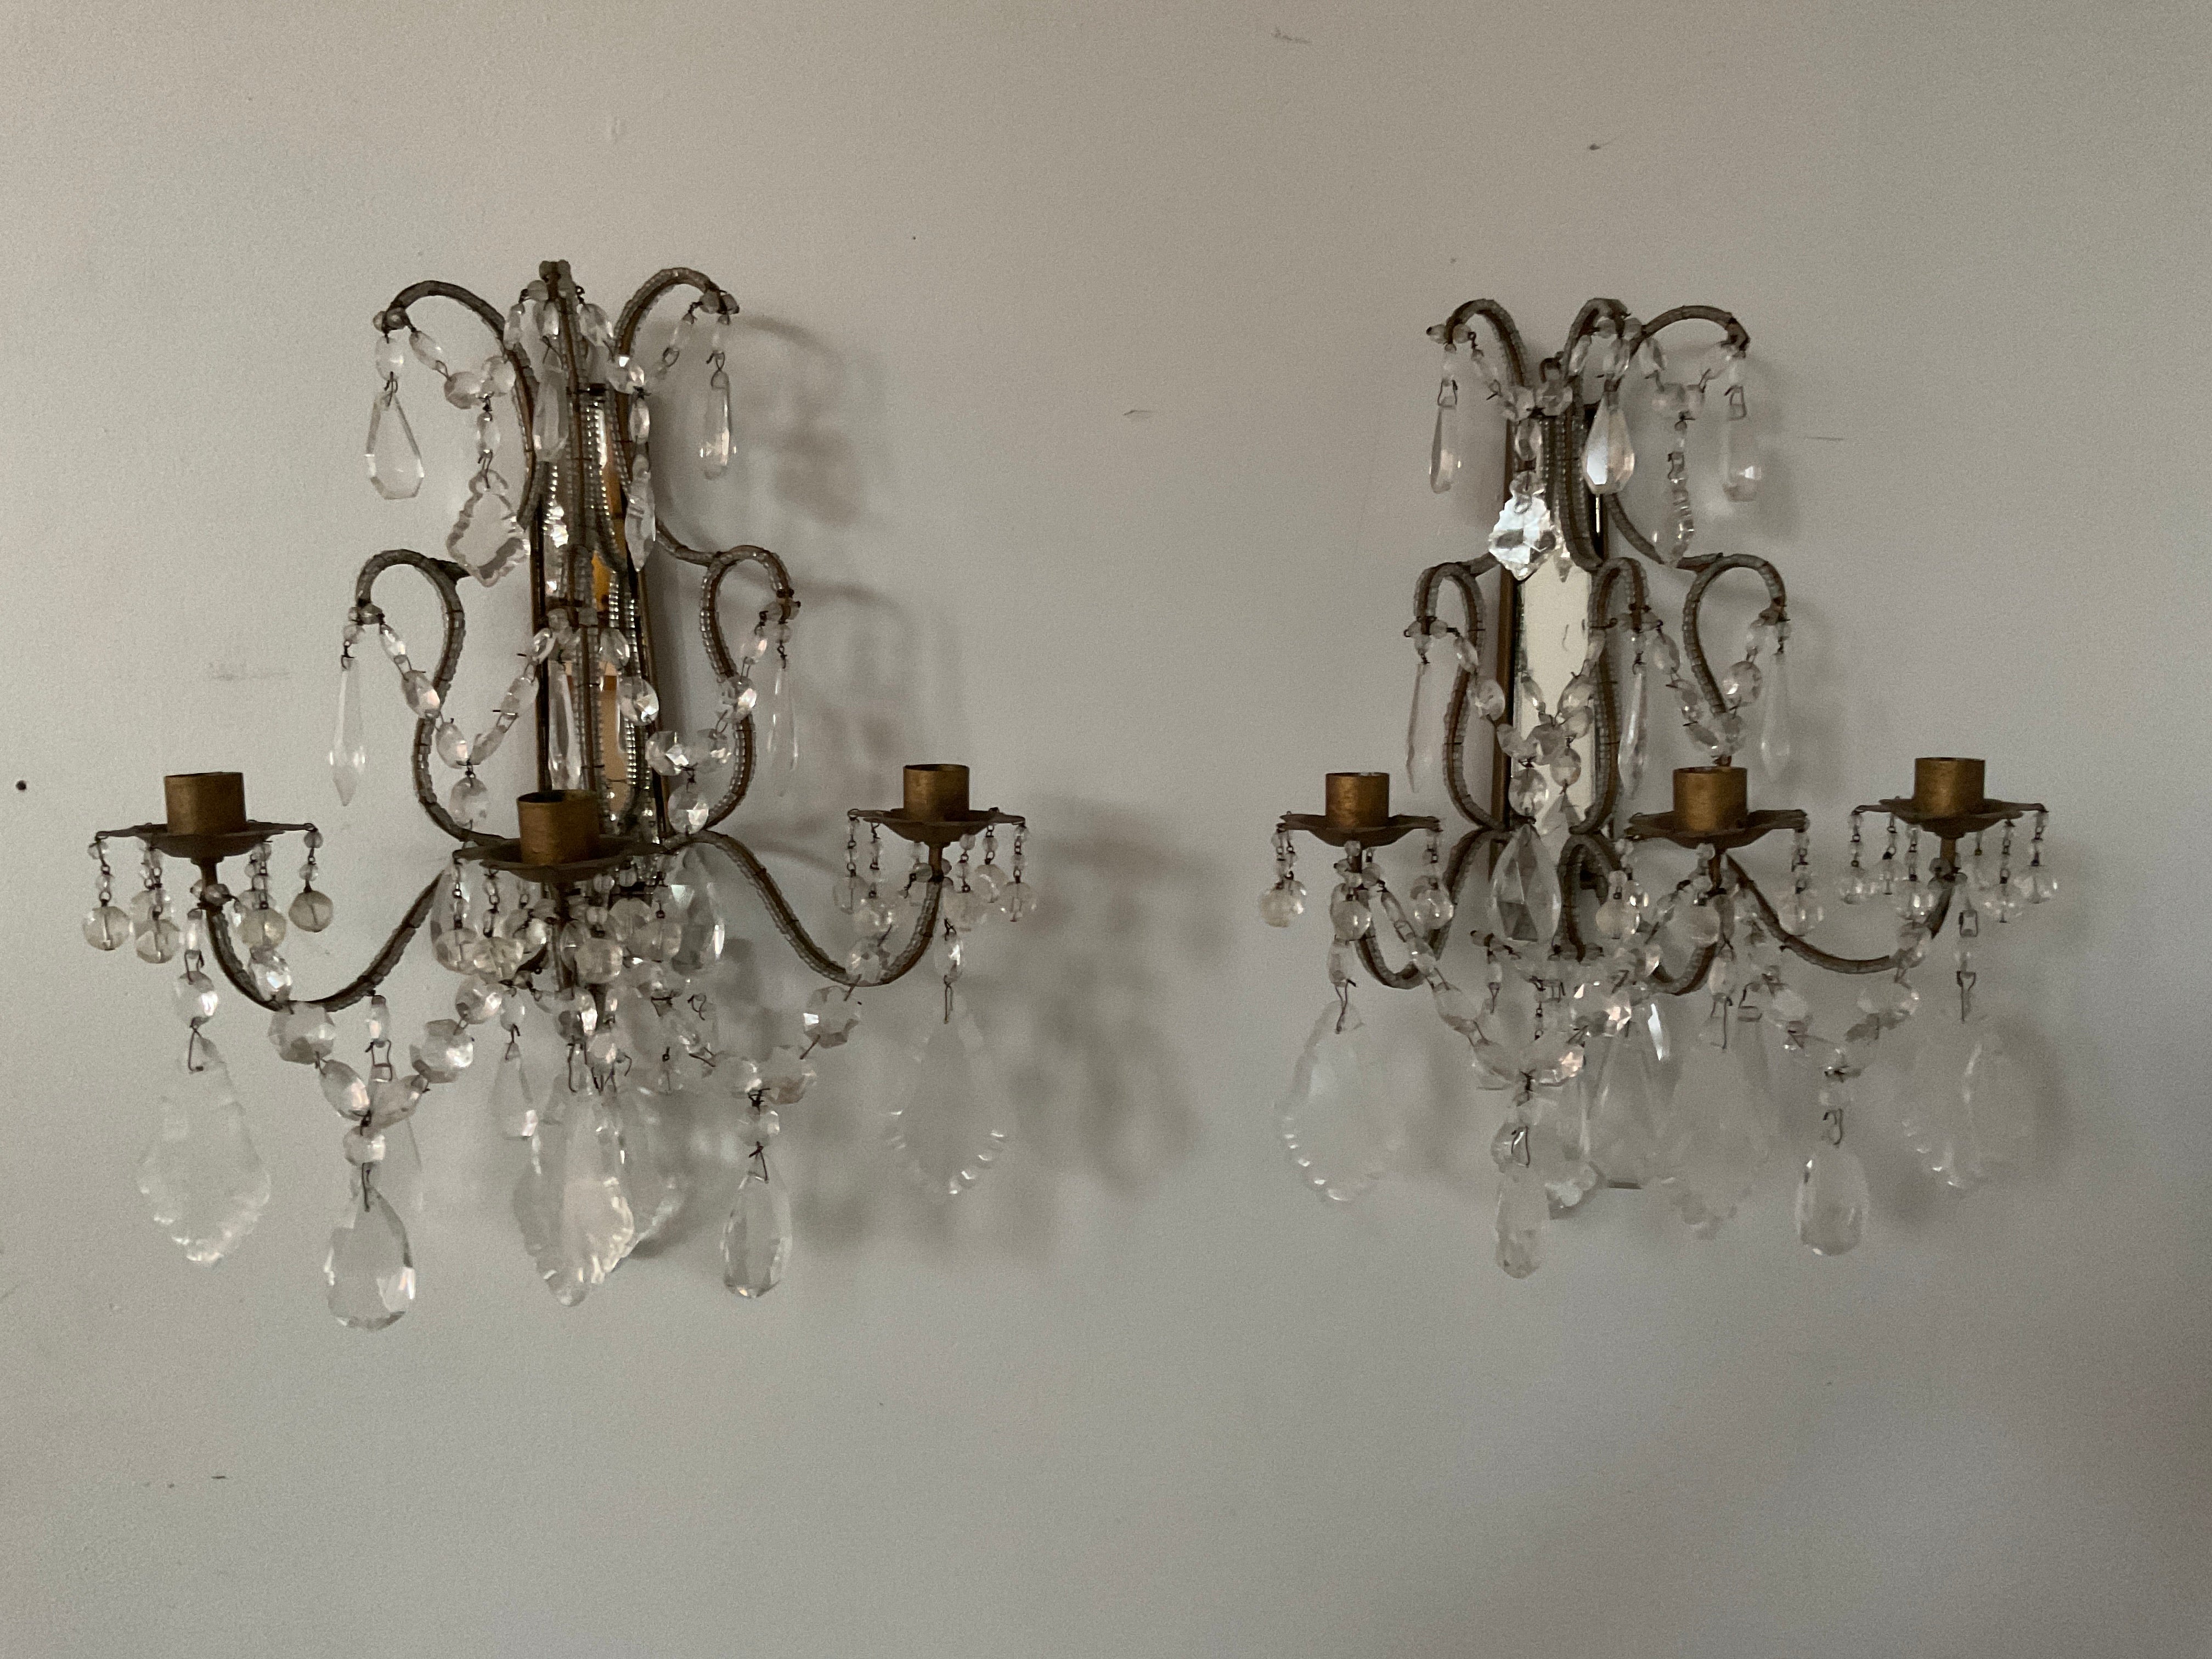 Italian mirrored back beaded sconces. There are no wires. In order to wire these you would have to do a French Wire. The wire would have to run along the arm.